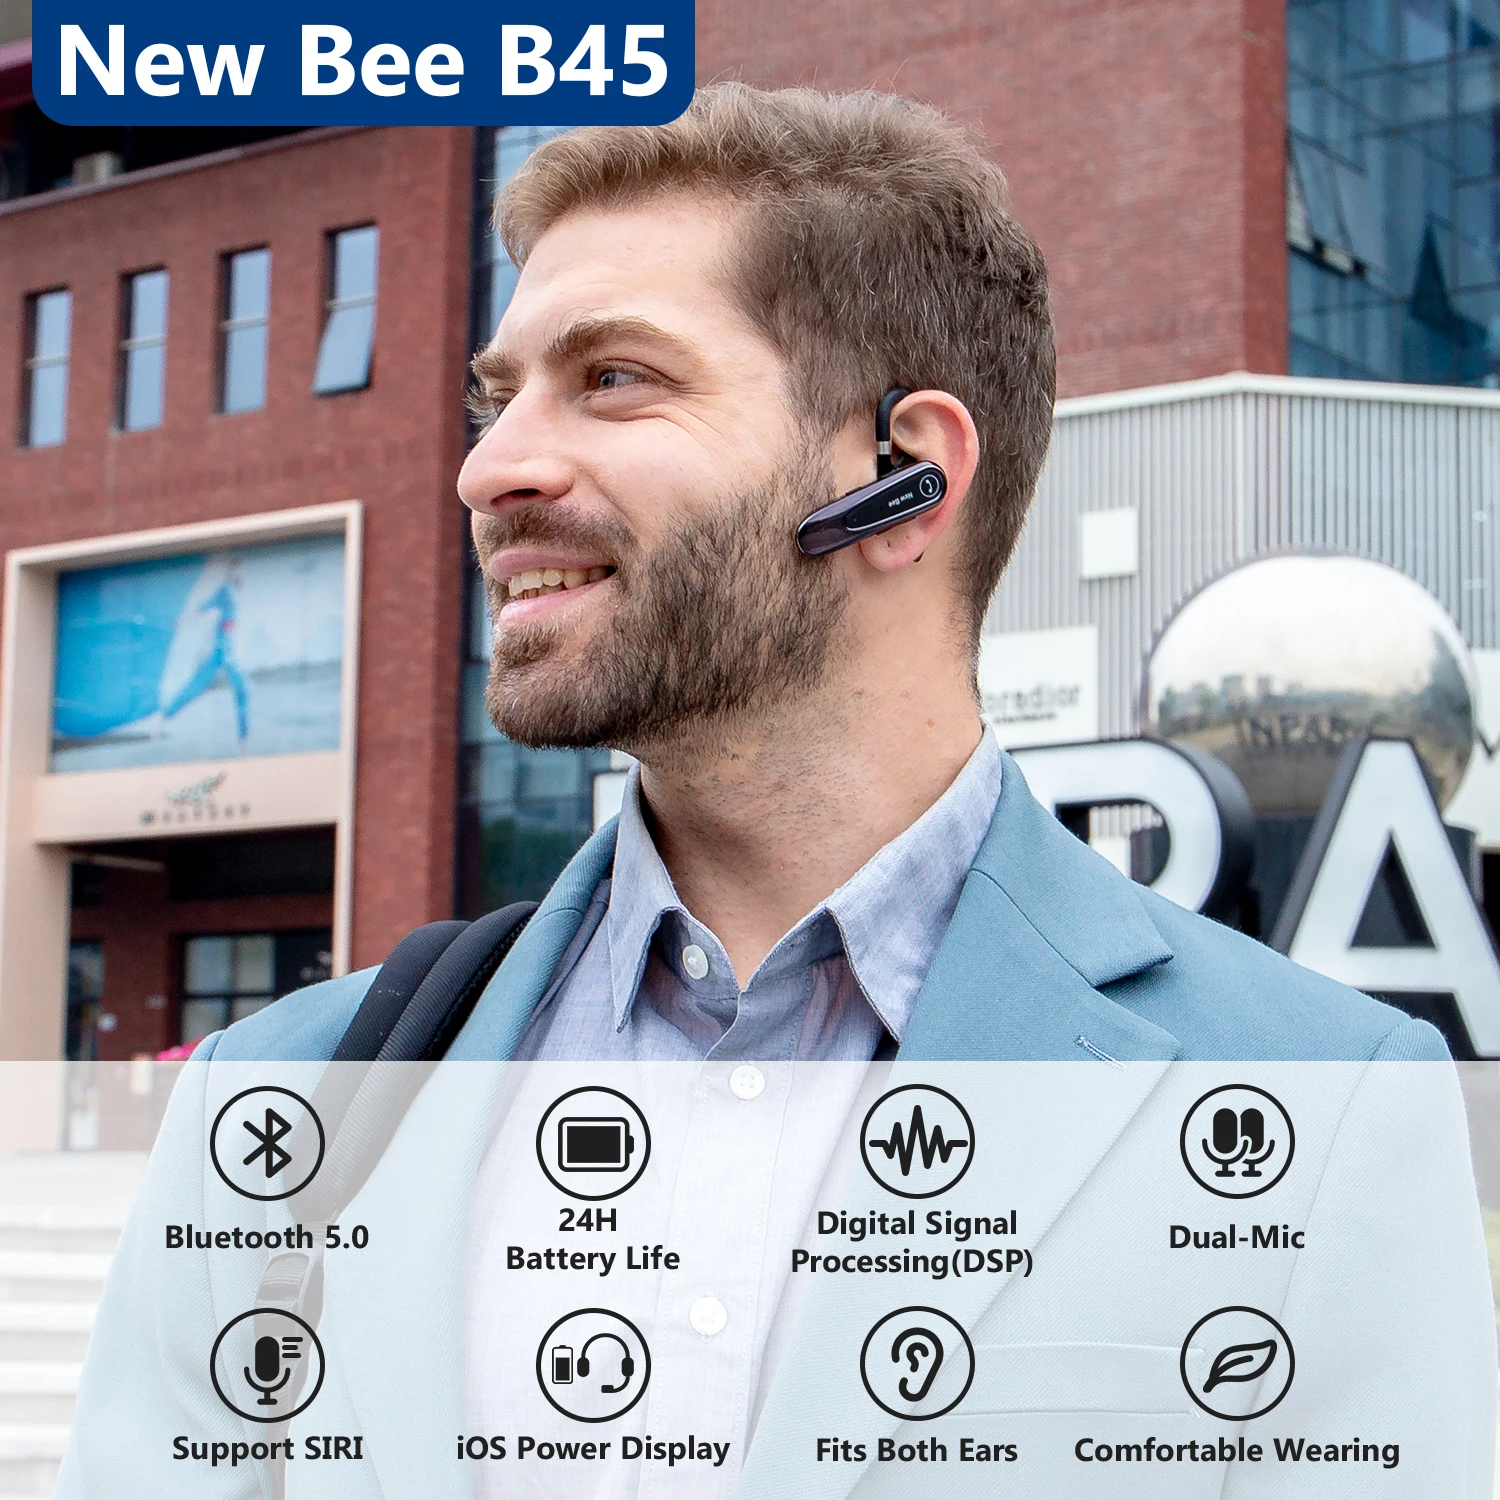 New Bee B45 Bluetooth 5.0 Headset Wireless Earphone Headphones with Dual Mic Earbuds Earpiece CVC8.0 Noise Reduction for Driving images - 6